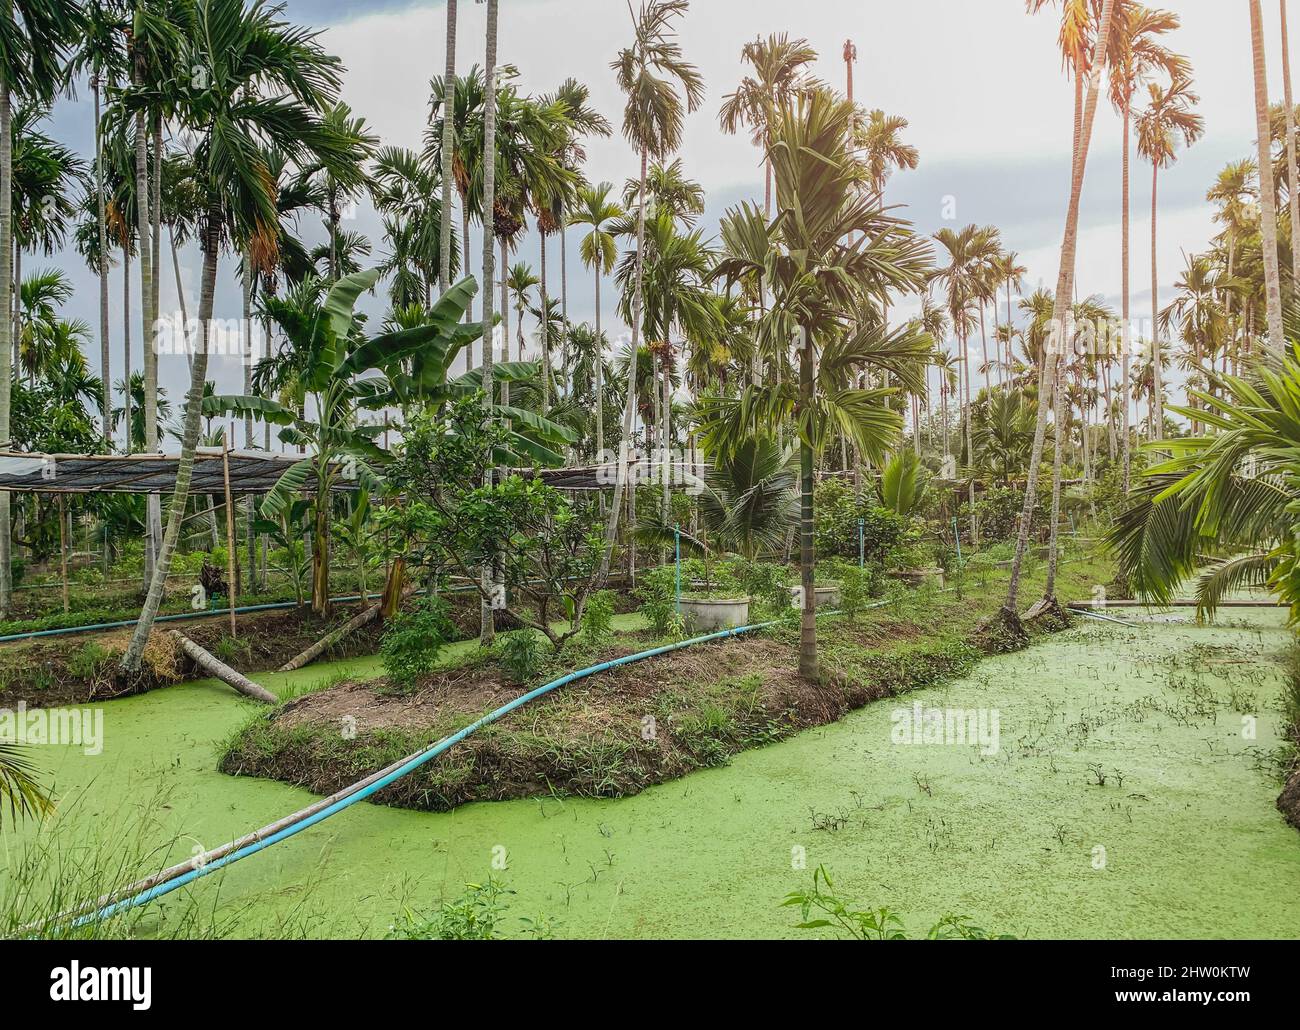 Betel palm tree along the field plantation with azolla in the water. Stock Photo